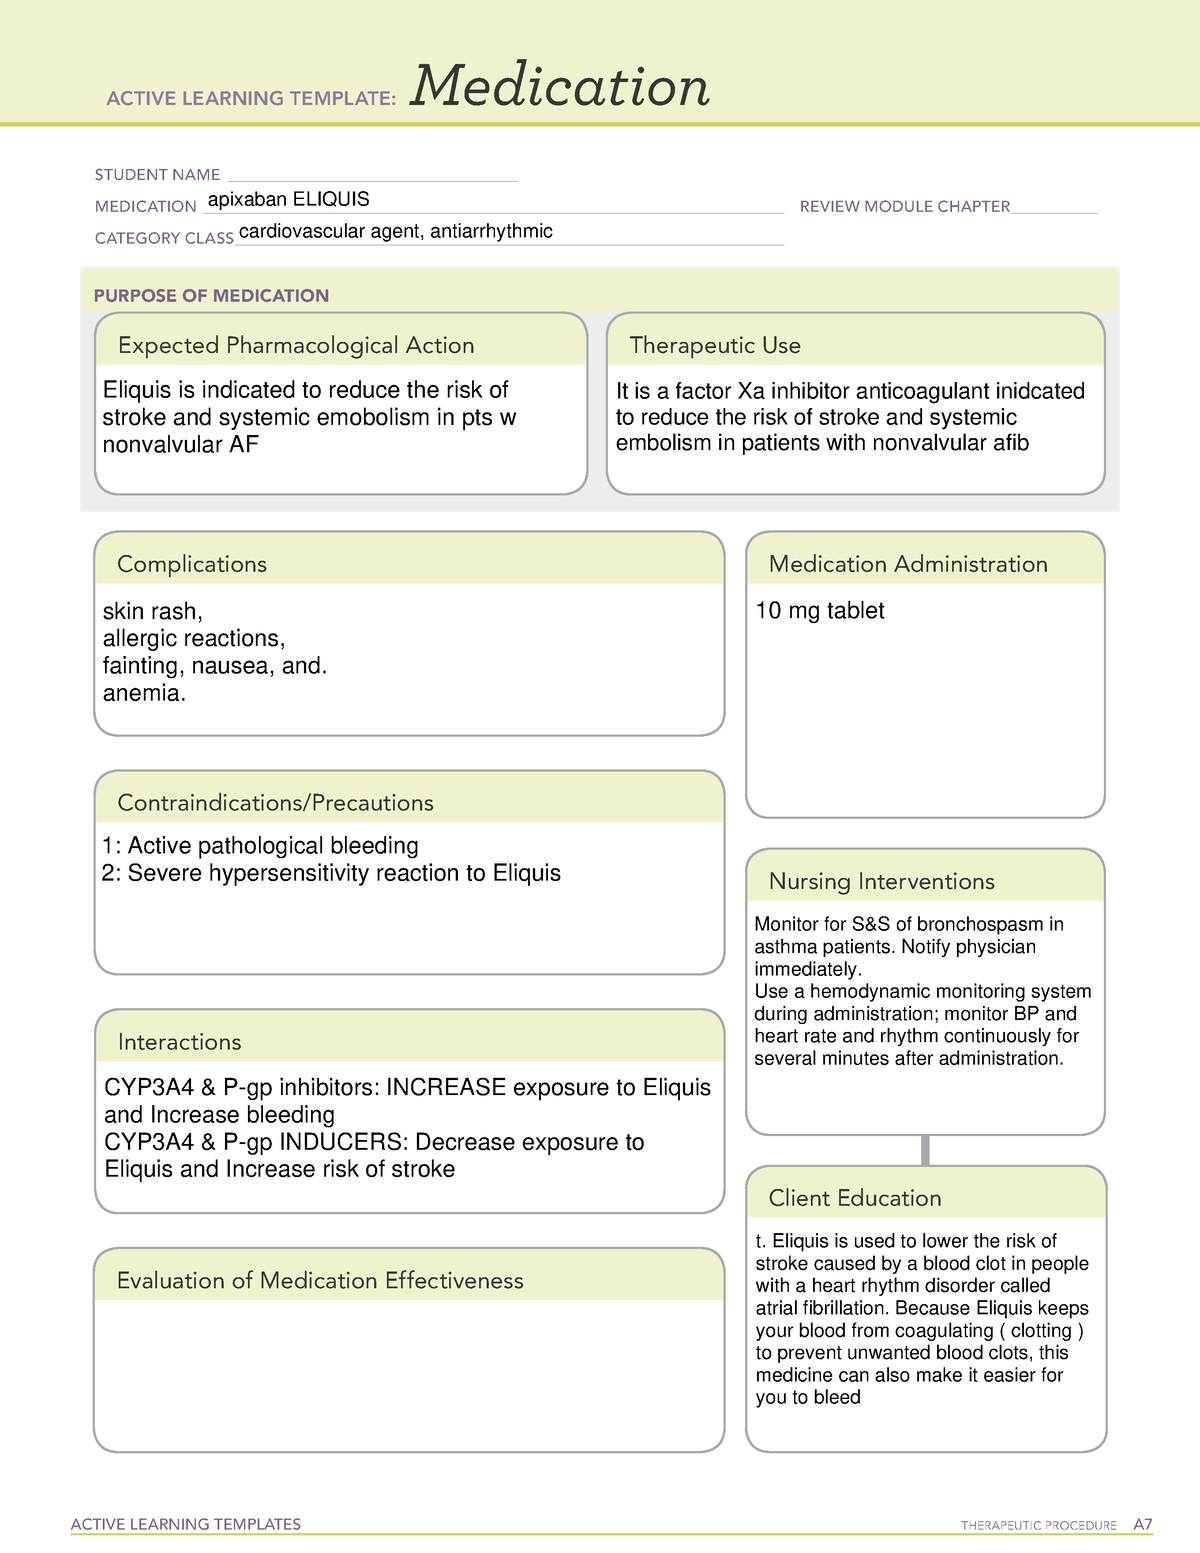 ATI medication template for med list ACTIVE LEARNING TEMPLATES